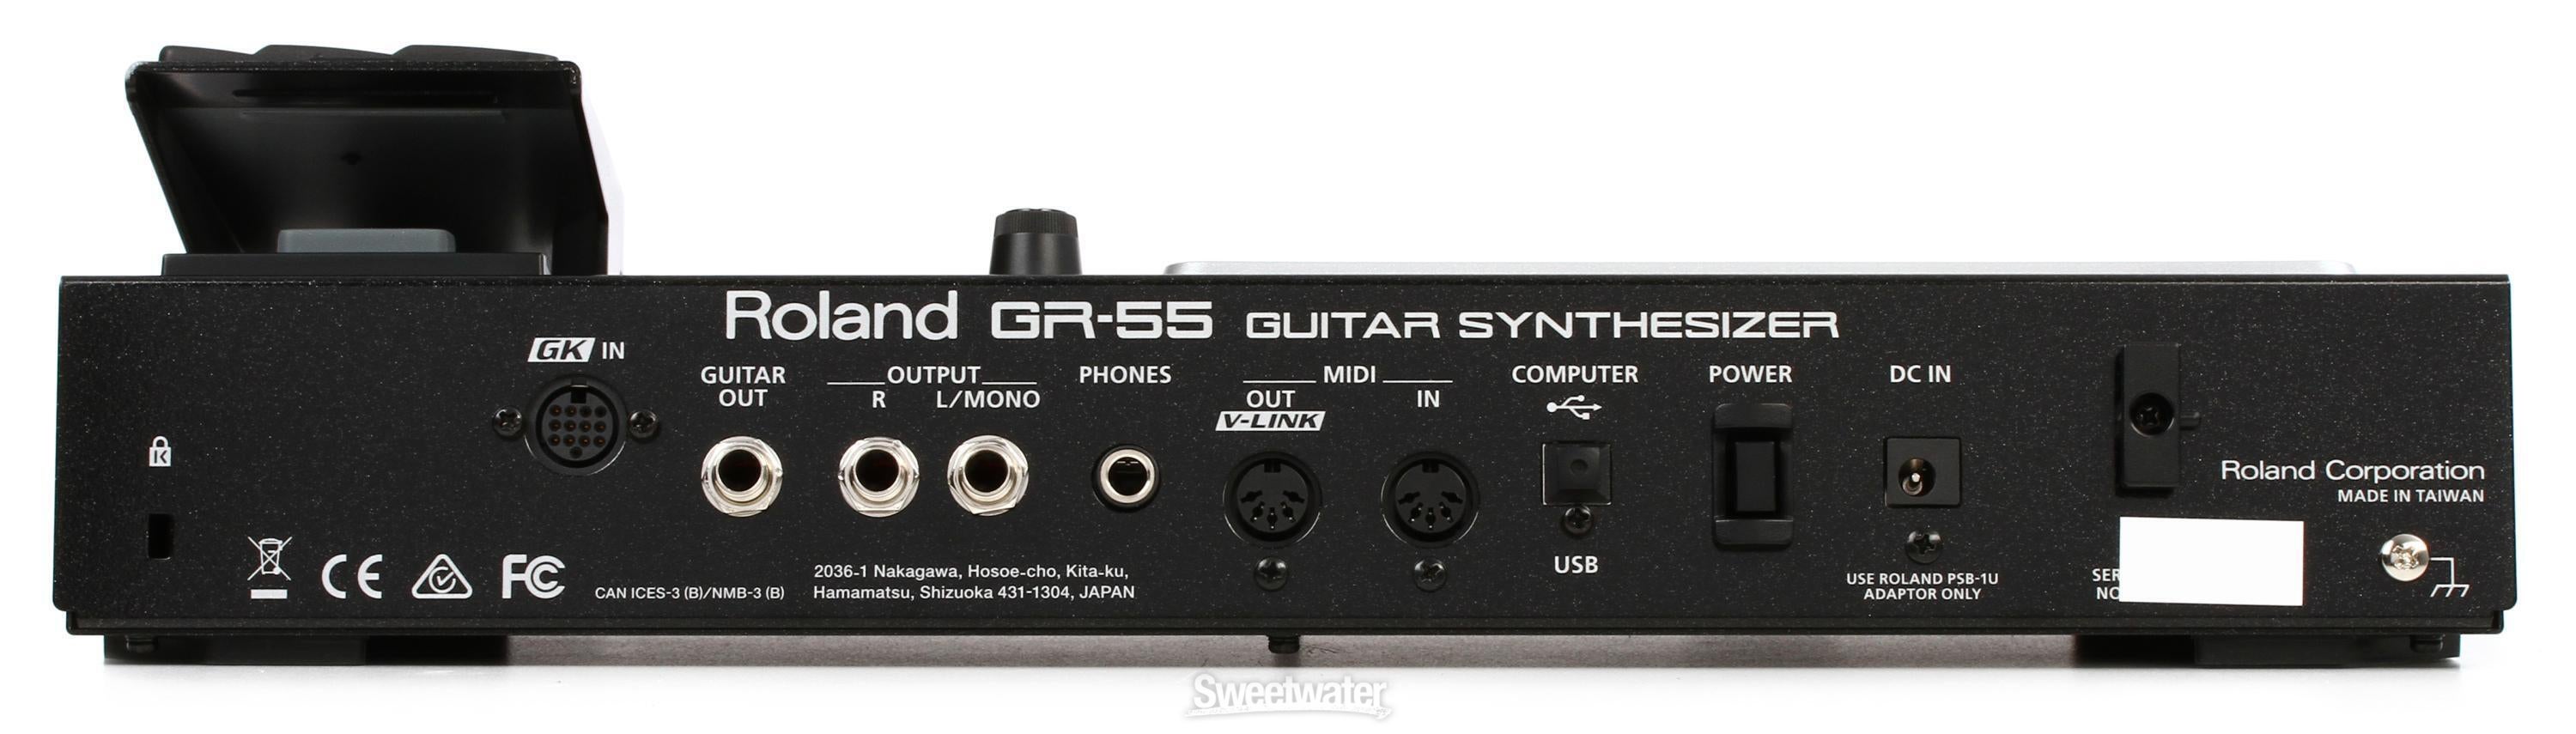 Roland GR-55 Guitar Synthesizer with GK-3 Pickup | Sweetwater